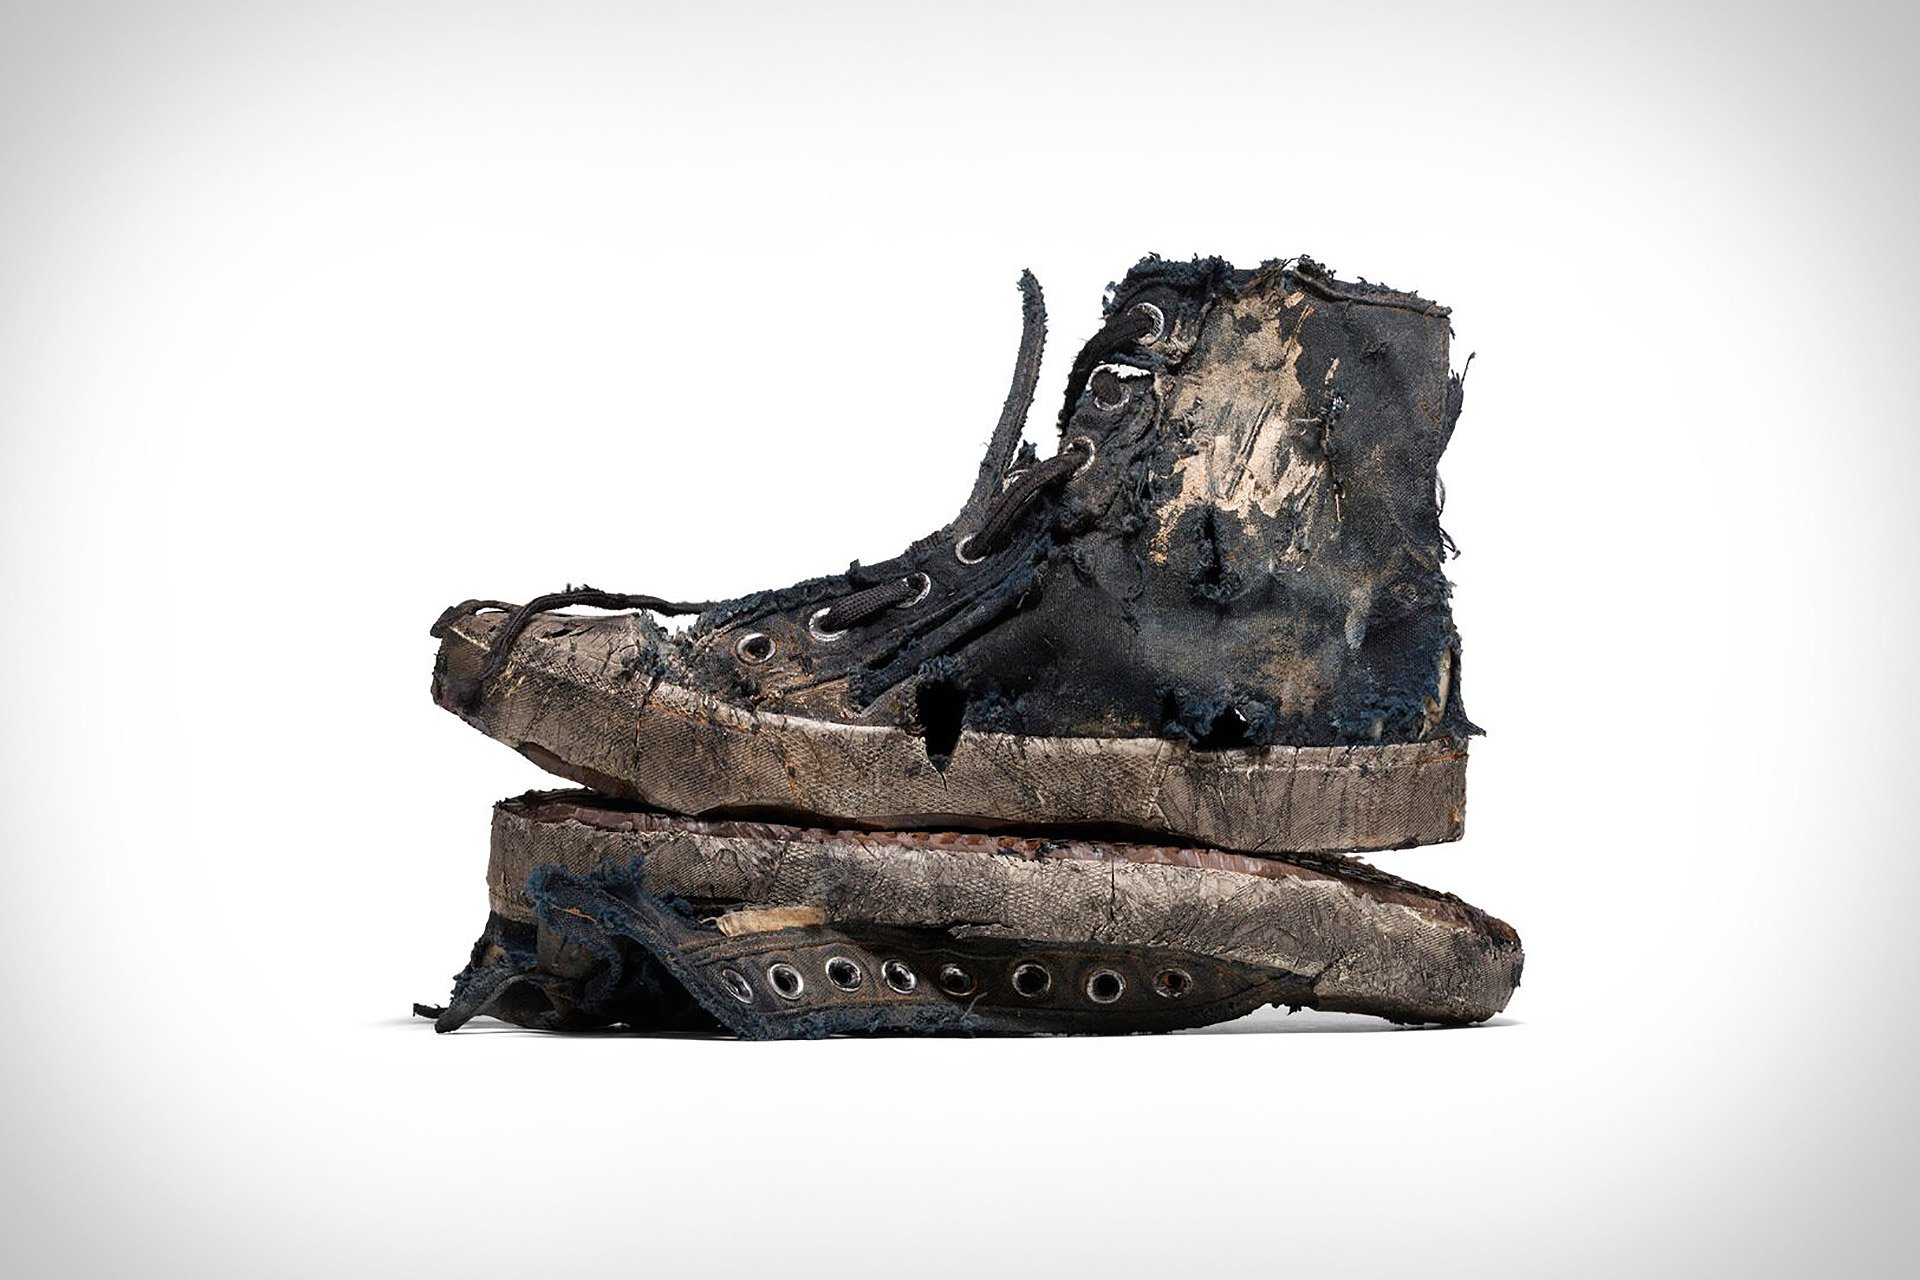 $1850 for Fully Destroyed Sneakers